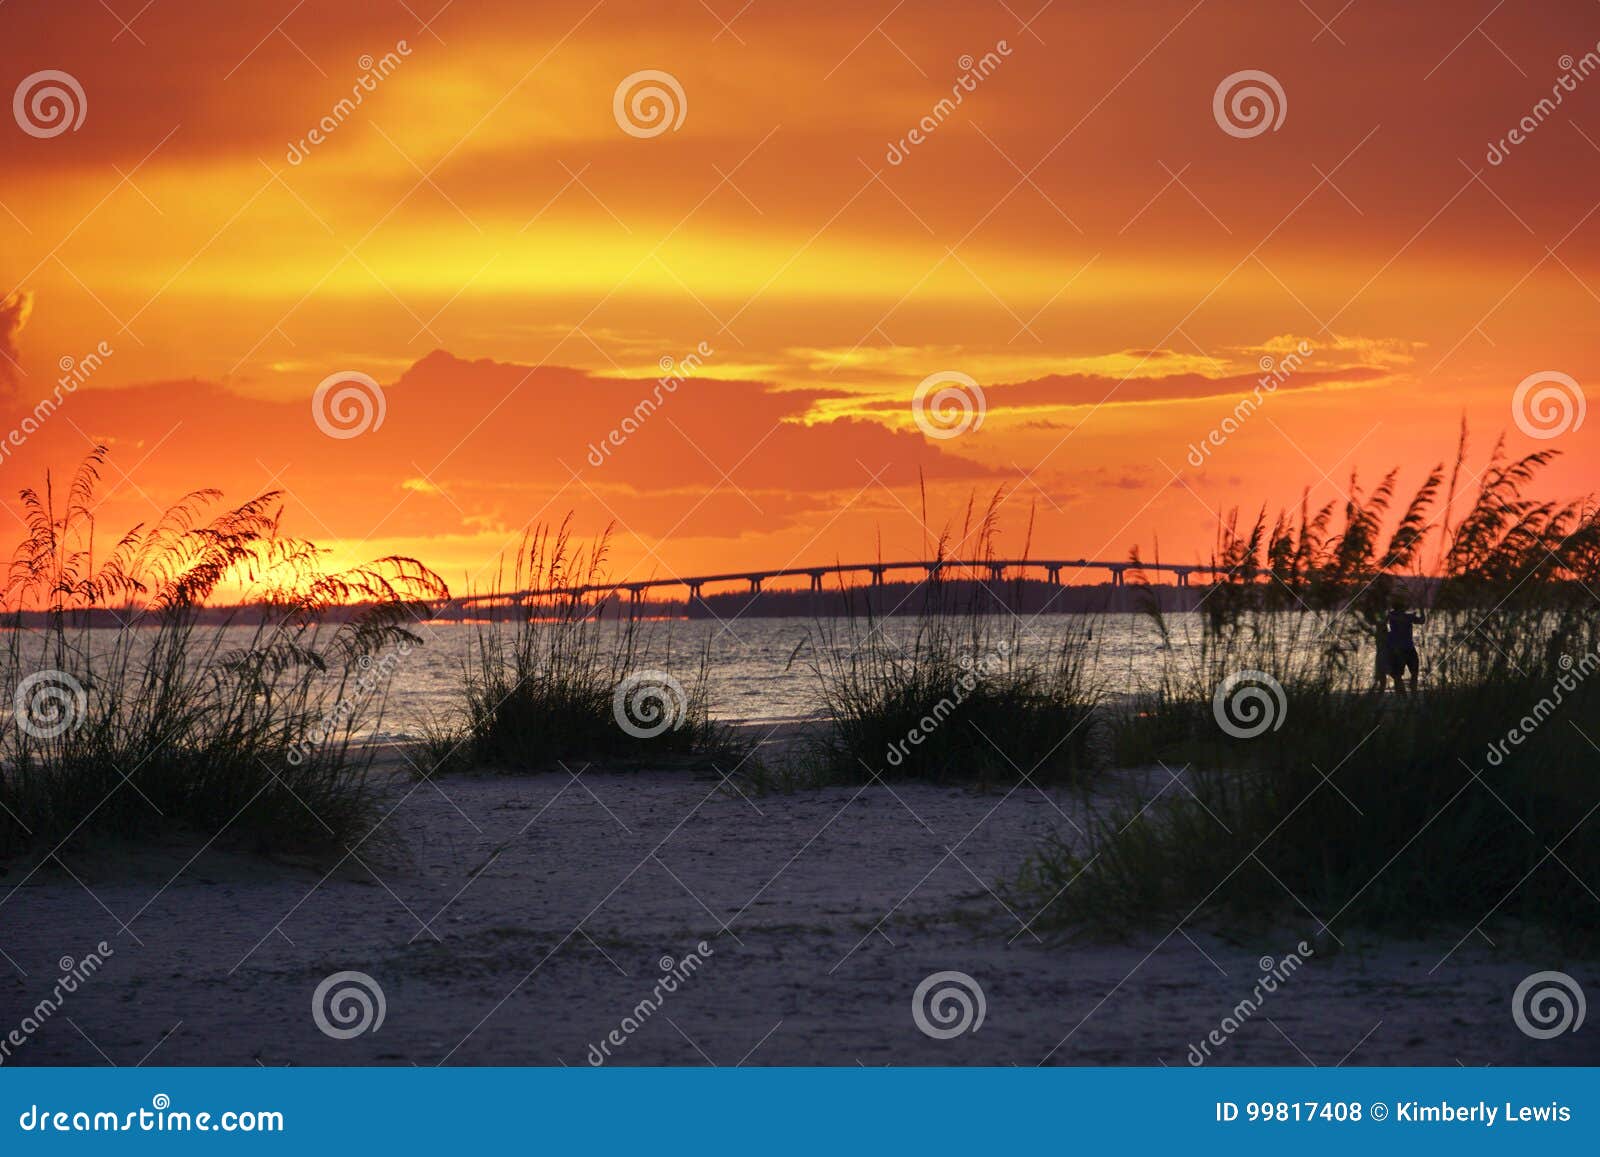 the glowing orange sunset over the bridge that leads to sanibel and captiva islands from ft.myers beach, florida.